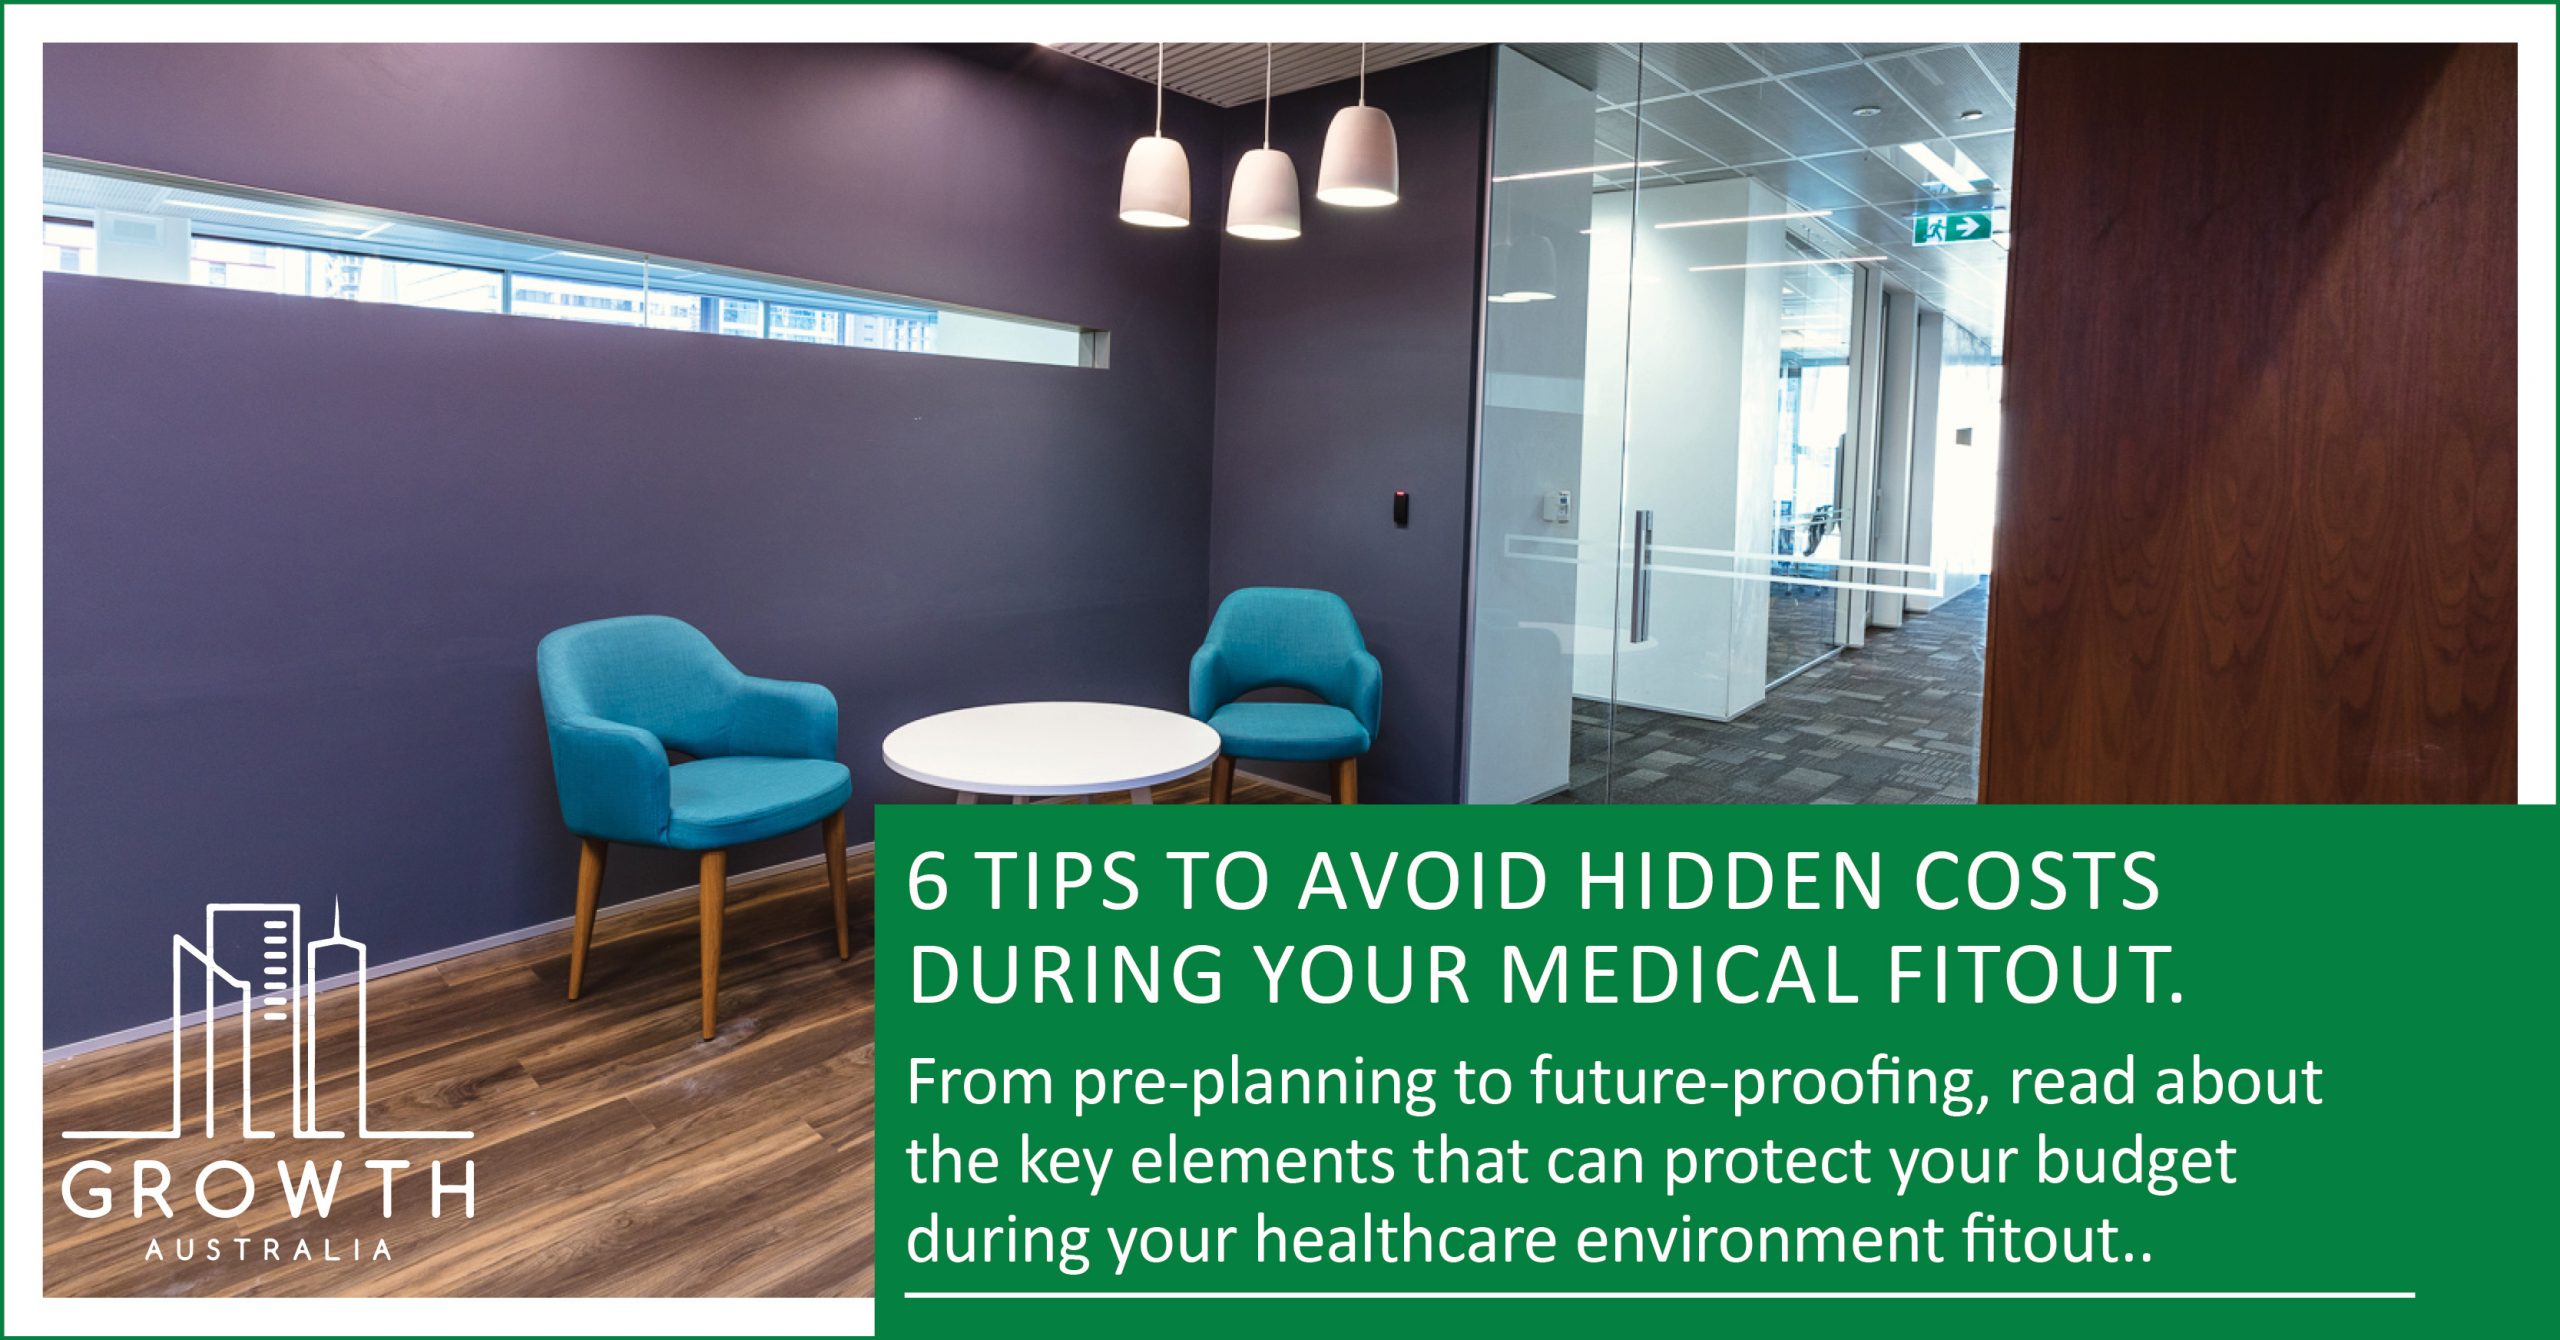 6 Tips to avoid hidden costs during your healthcare fitout.